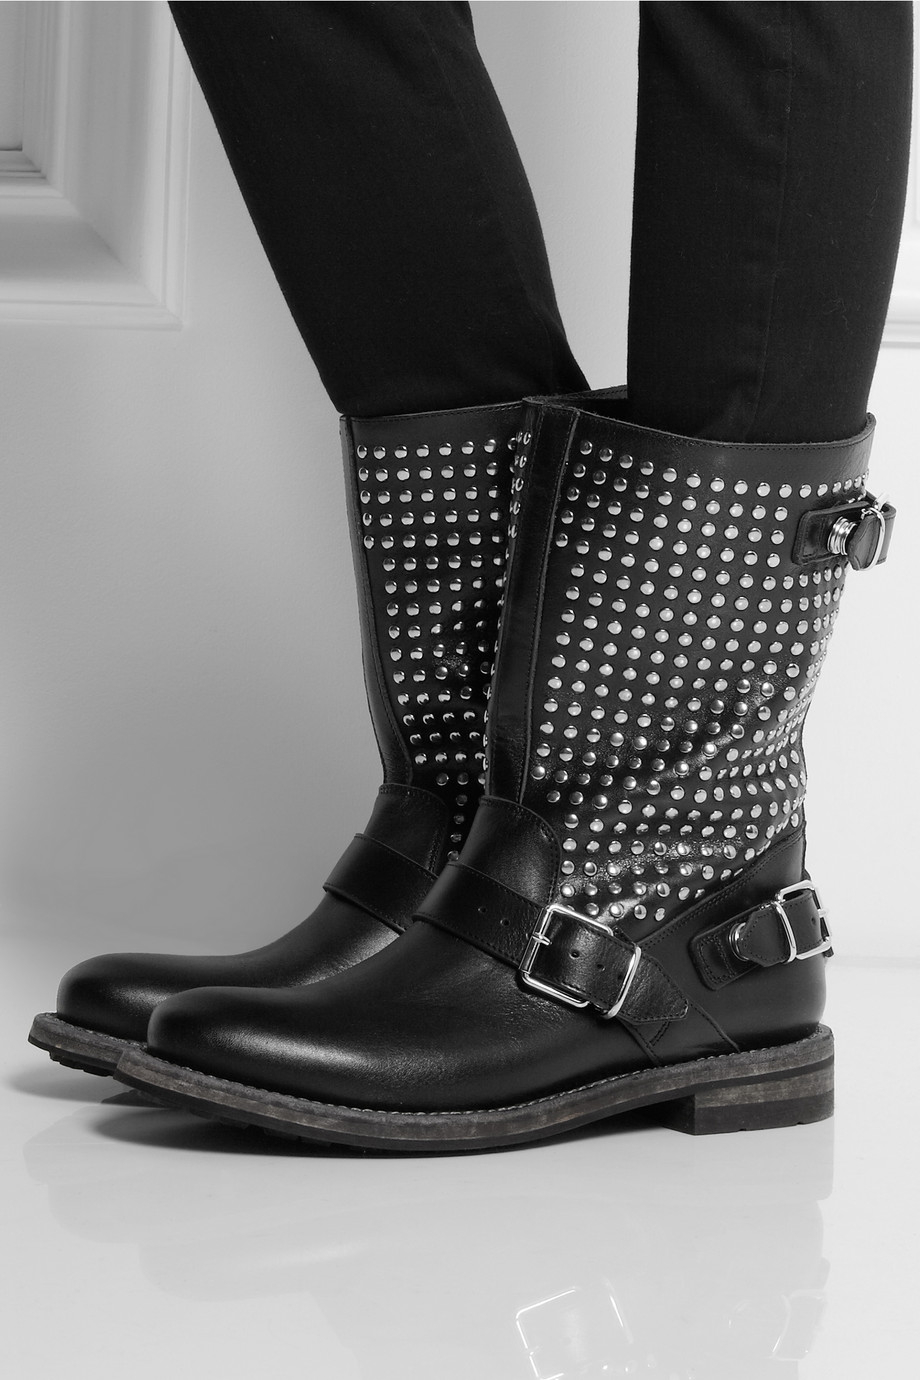 burberry motorcycle boots Online shopping has never been as easy!